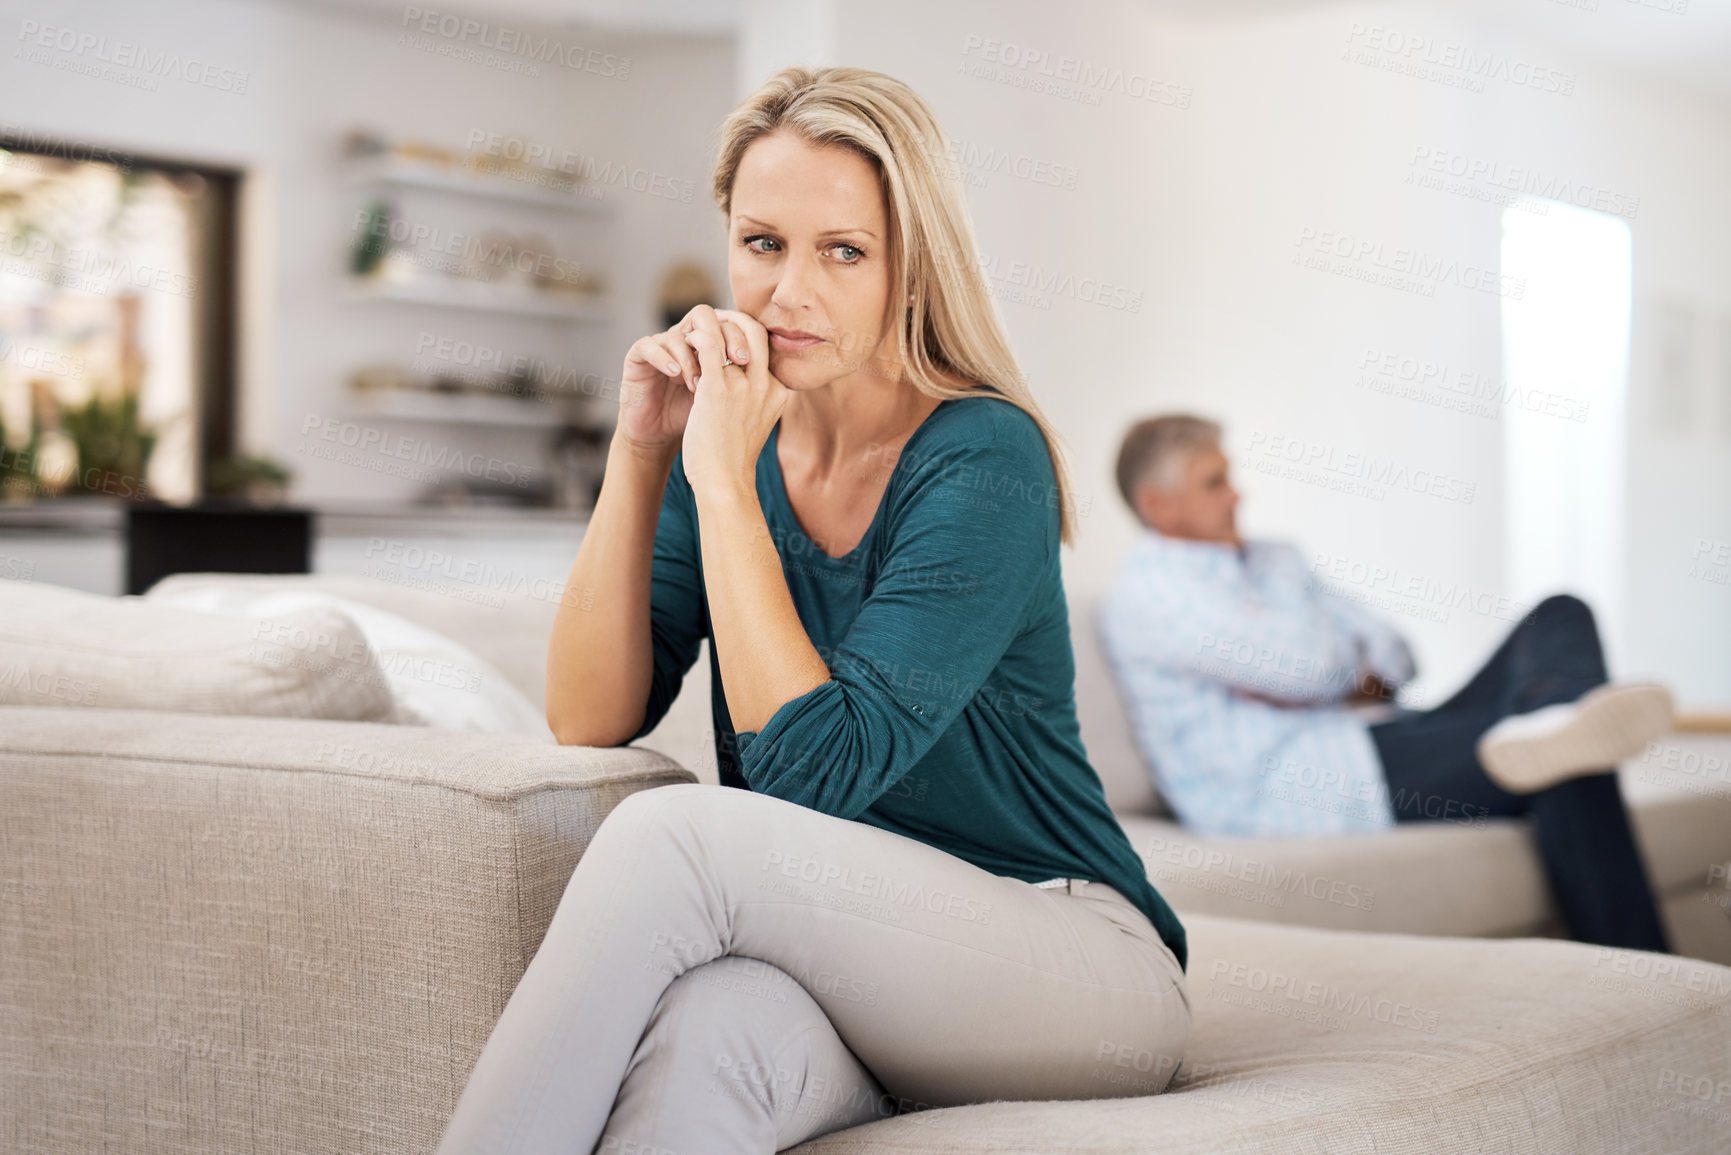 Buy stock photo Cropped shot of a mature woman looking despondent after having a fight with her husband at home